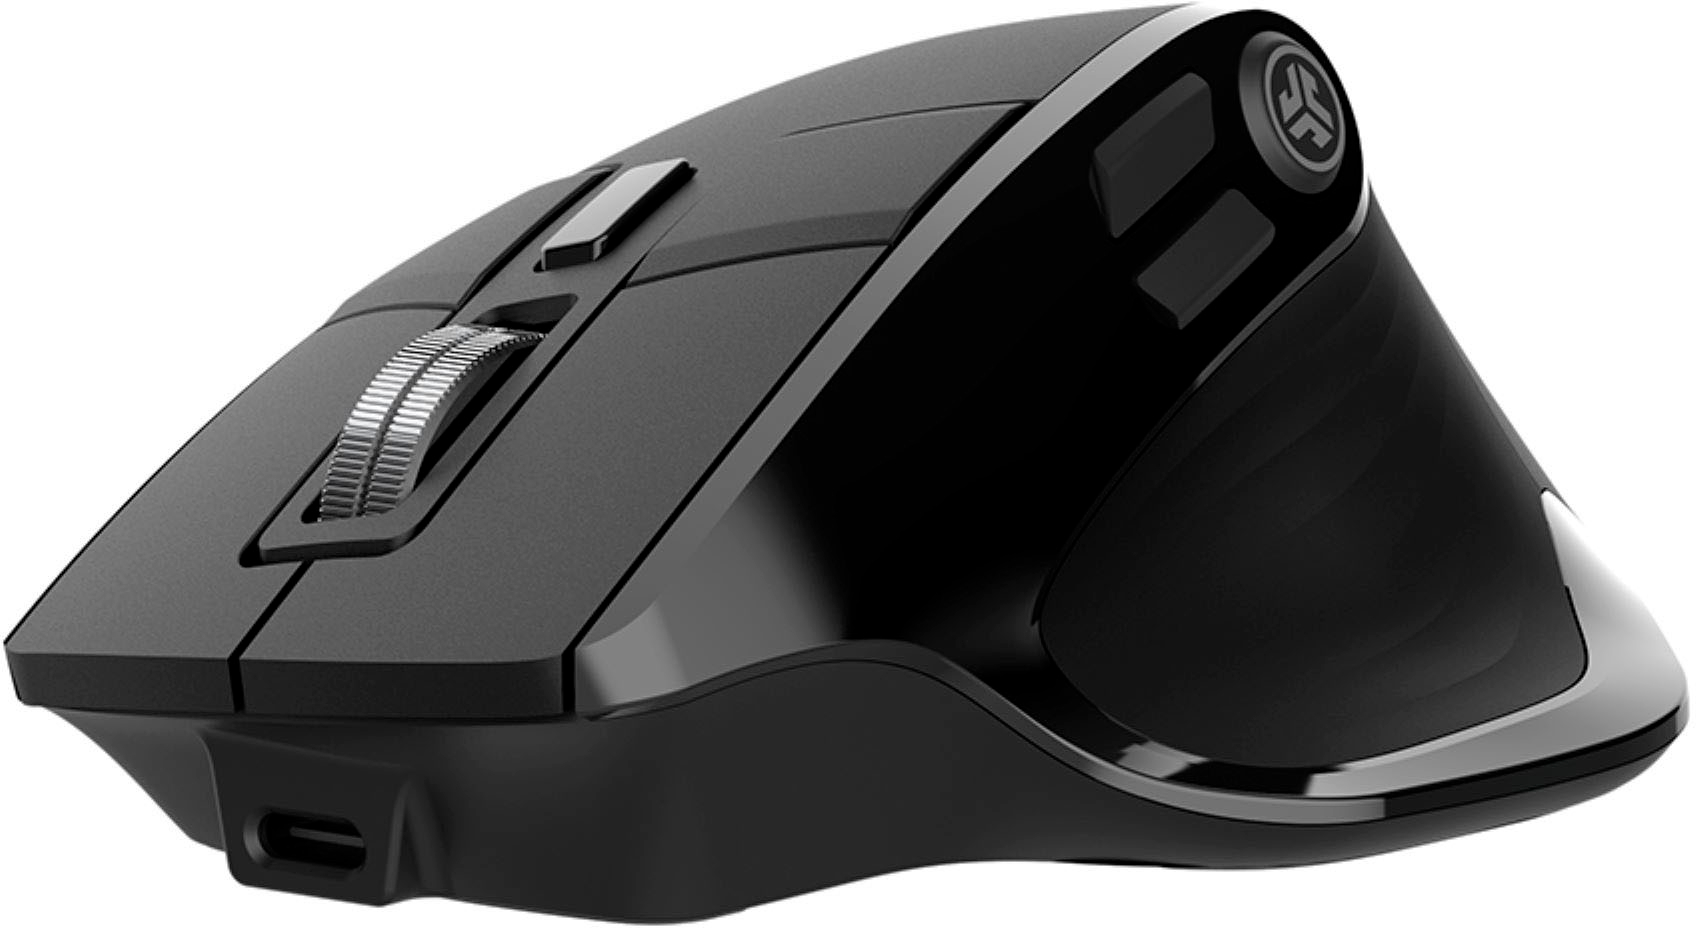 JLab Epic Full-Size Wireless Bluetooth Optical Mouse Black  MEPICMOUSERBLK124 - Best Buy